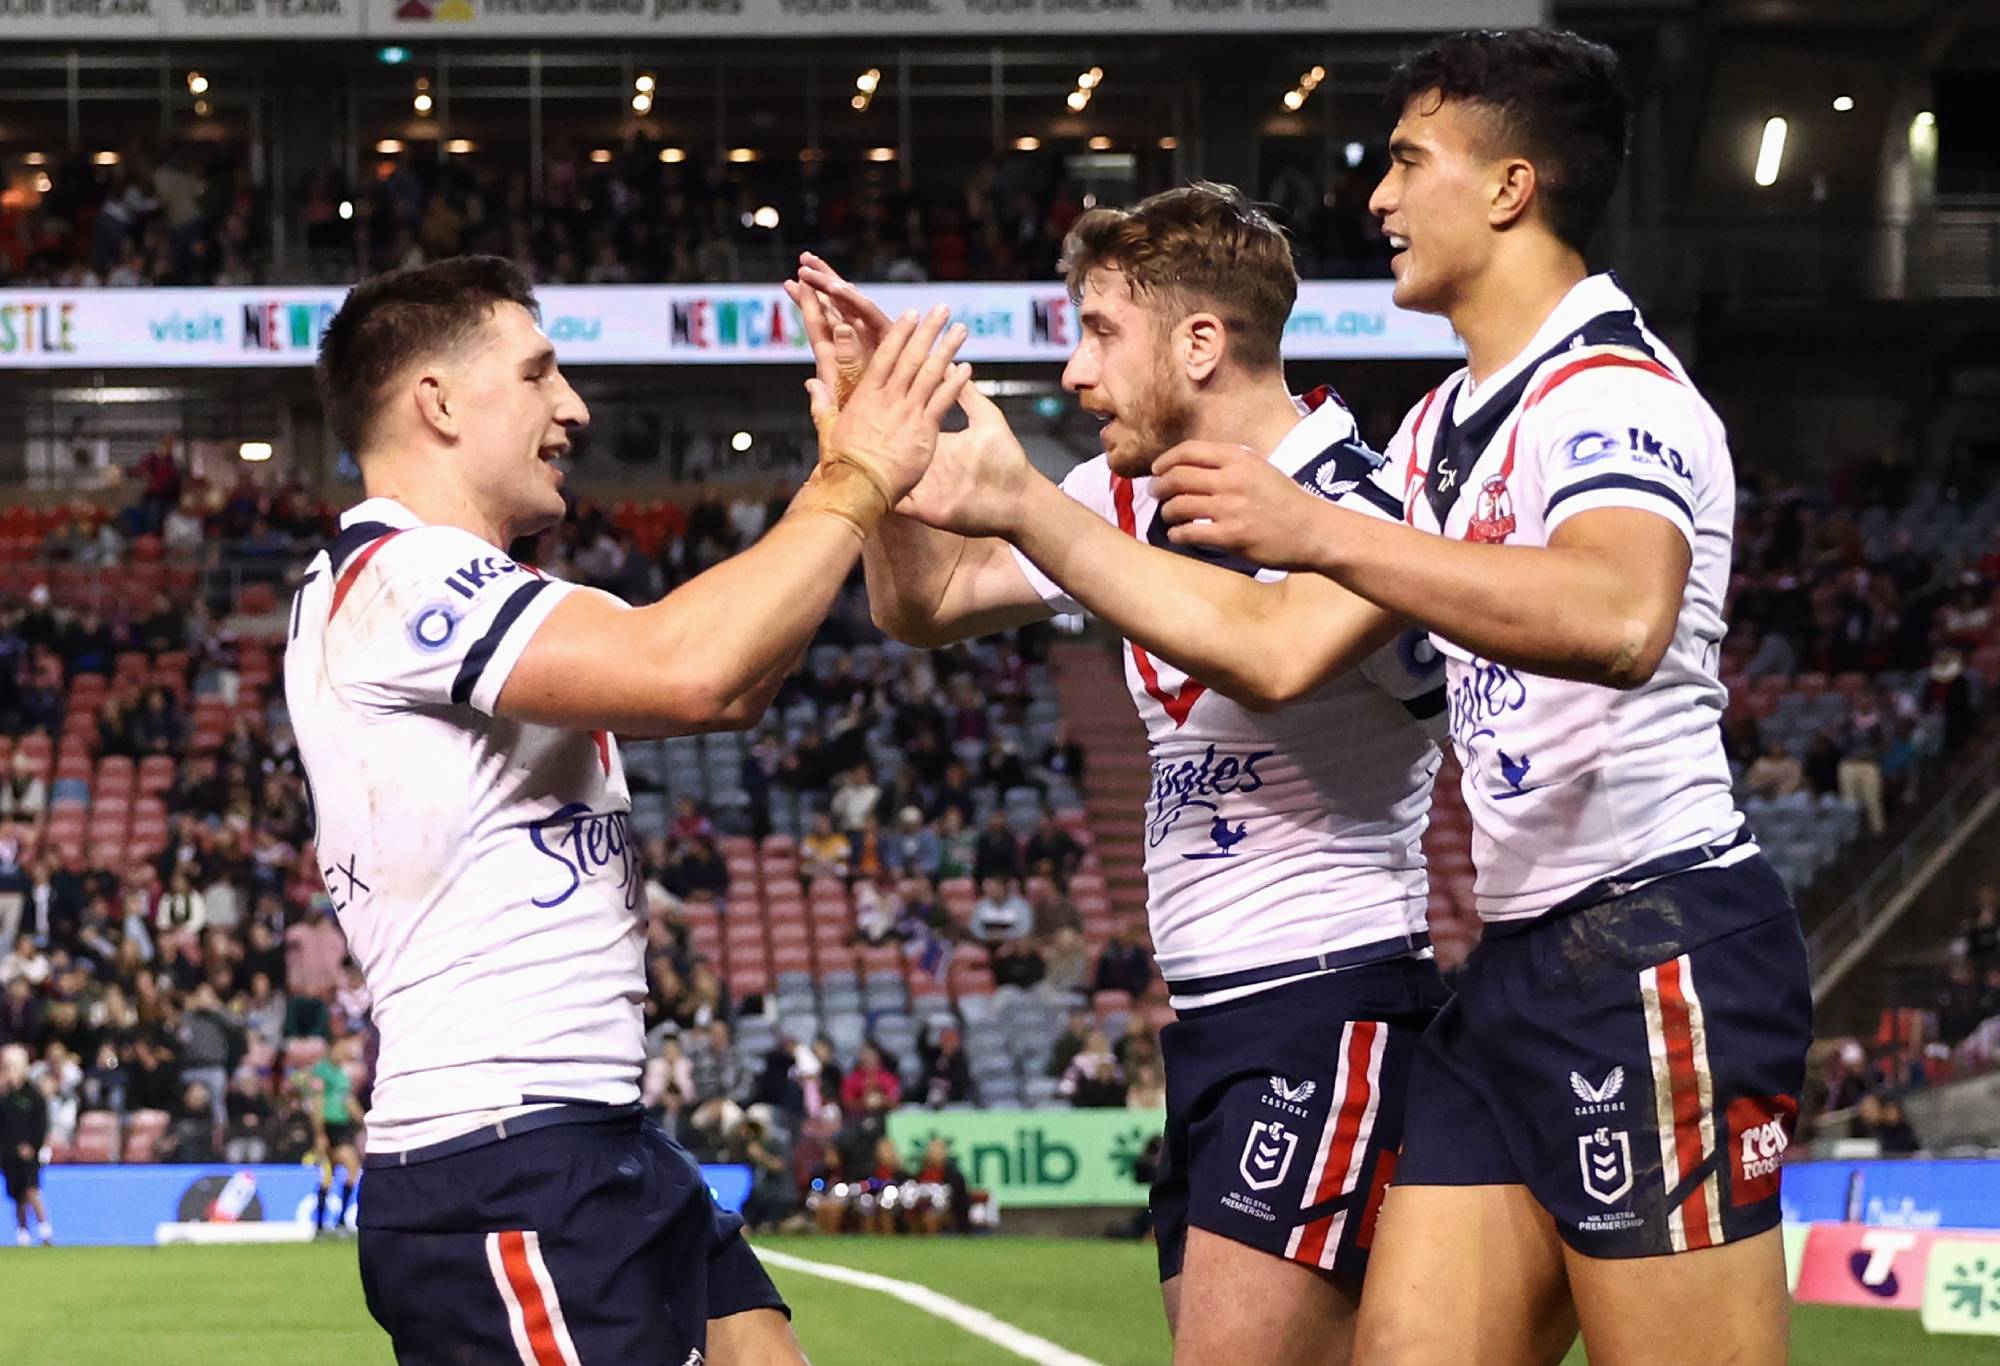 NEWCASTLE, AUSTRALIA - JULY 22: Jospeh Suaalii of the Roosters celebrates scoring a try with team mates during the round 19 NRL match between the Newcastle Knights and the Sydney Roosters at McDonald Jones Stadium, on July 22, 2022, in Newcastle, Australia. (Photo by Matt King/Getty Images)